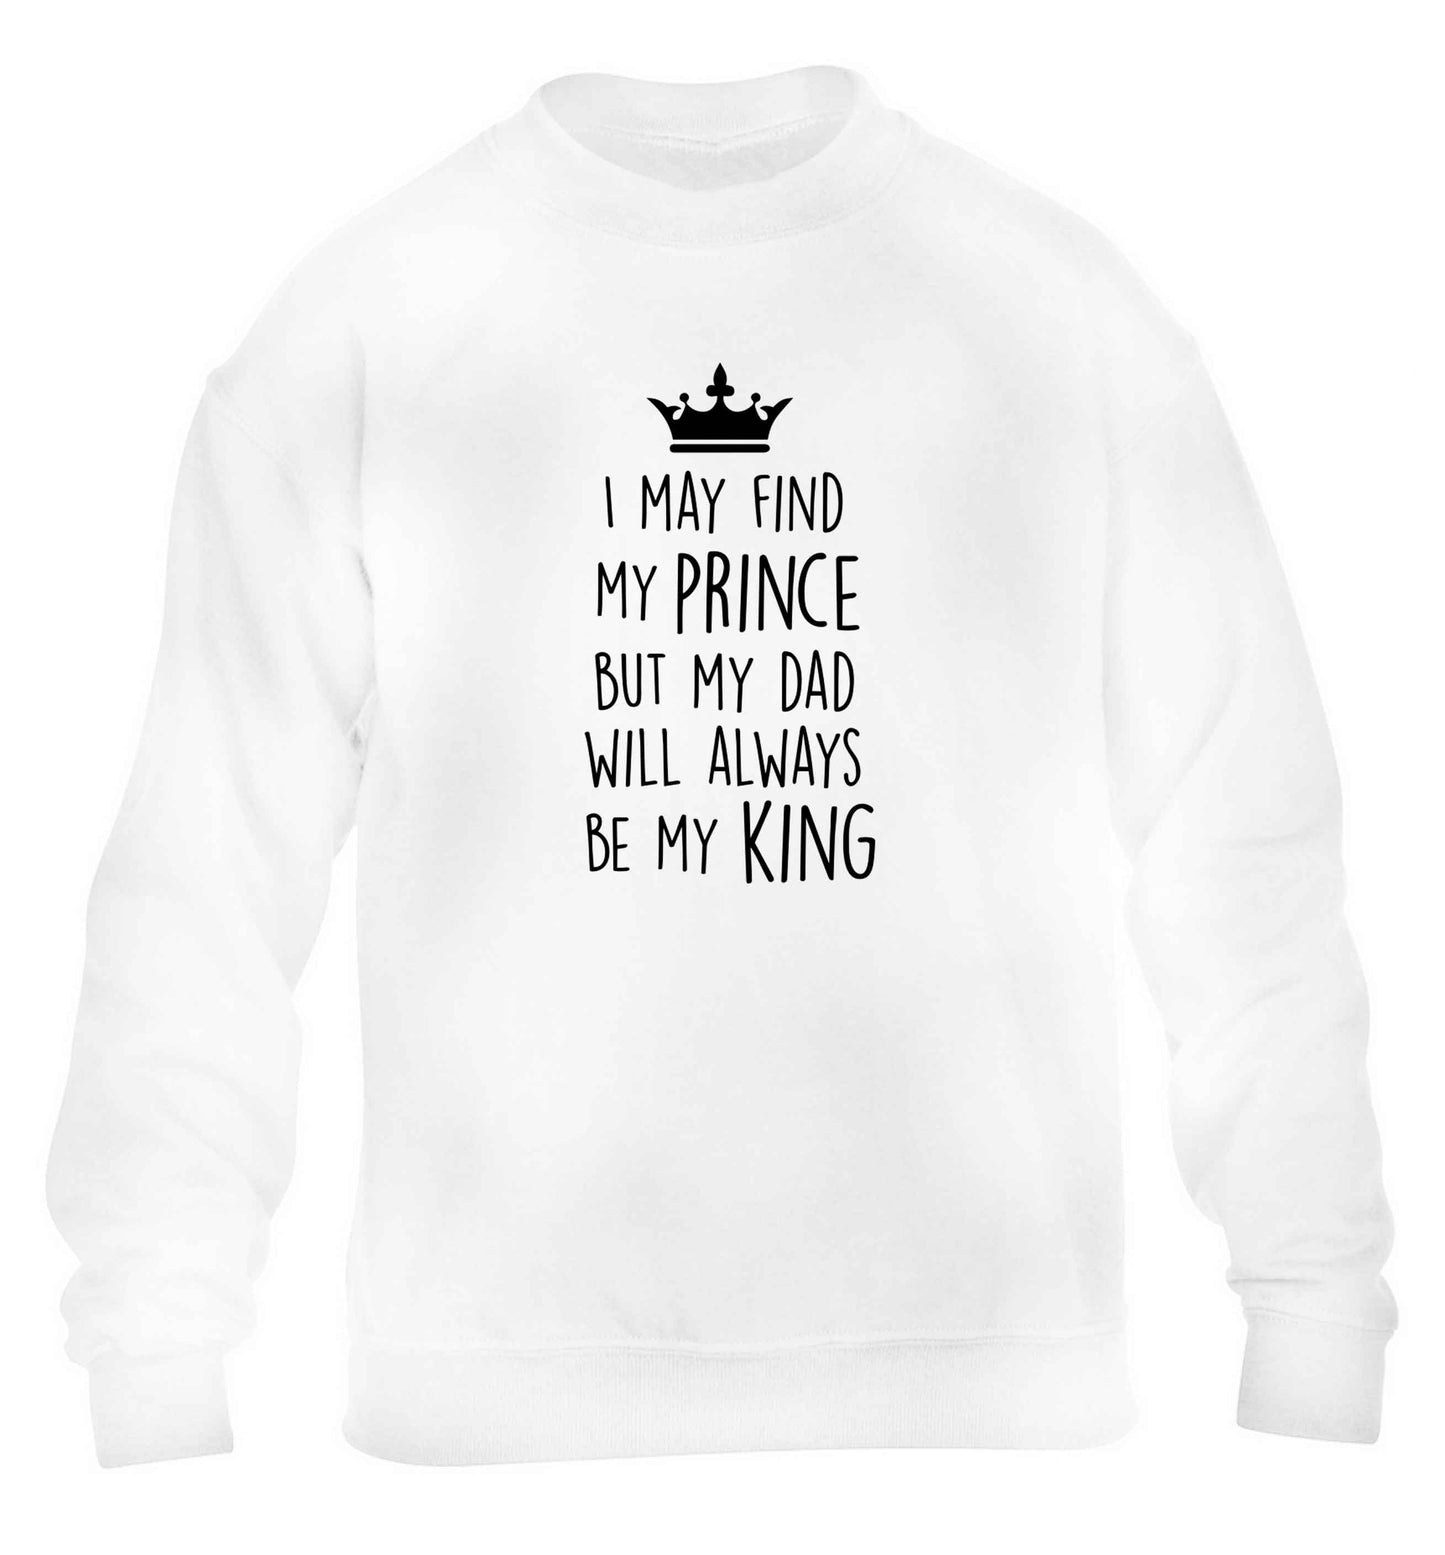 I may find my prince but my dad will always be my king children's white sweater 12-13 Years